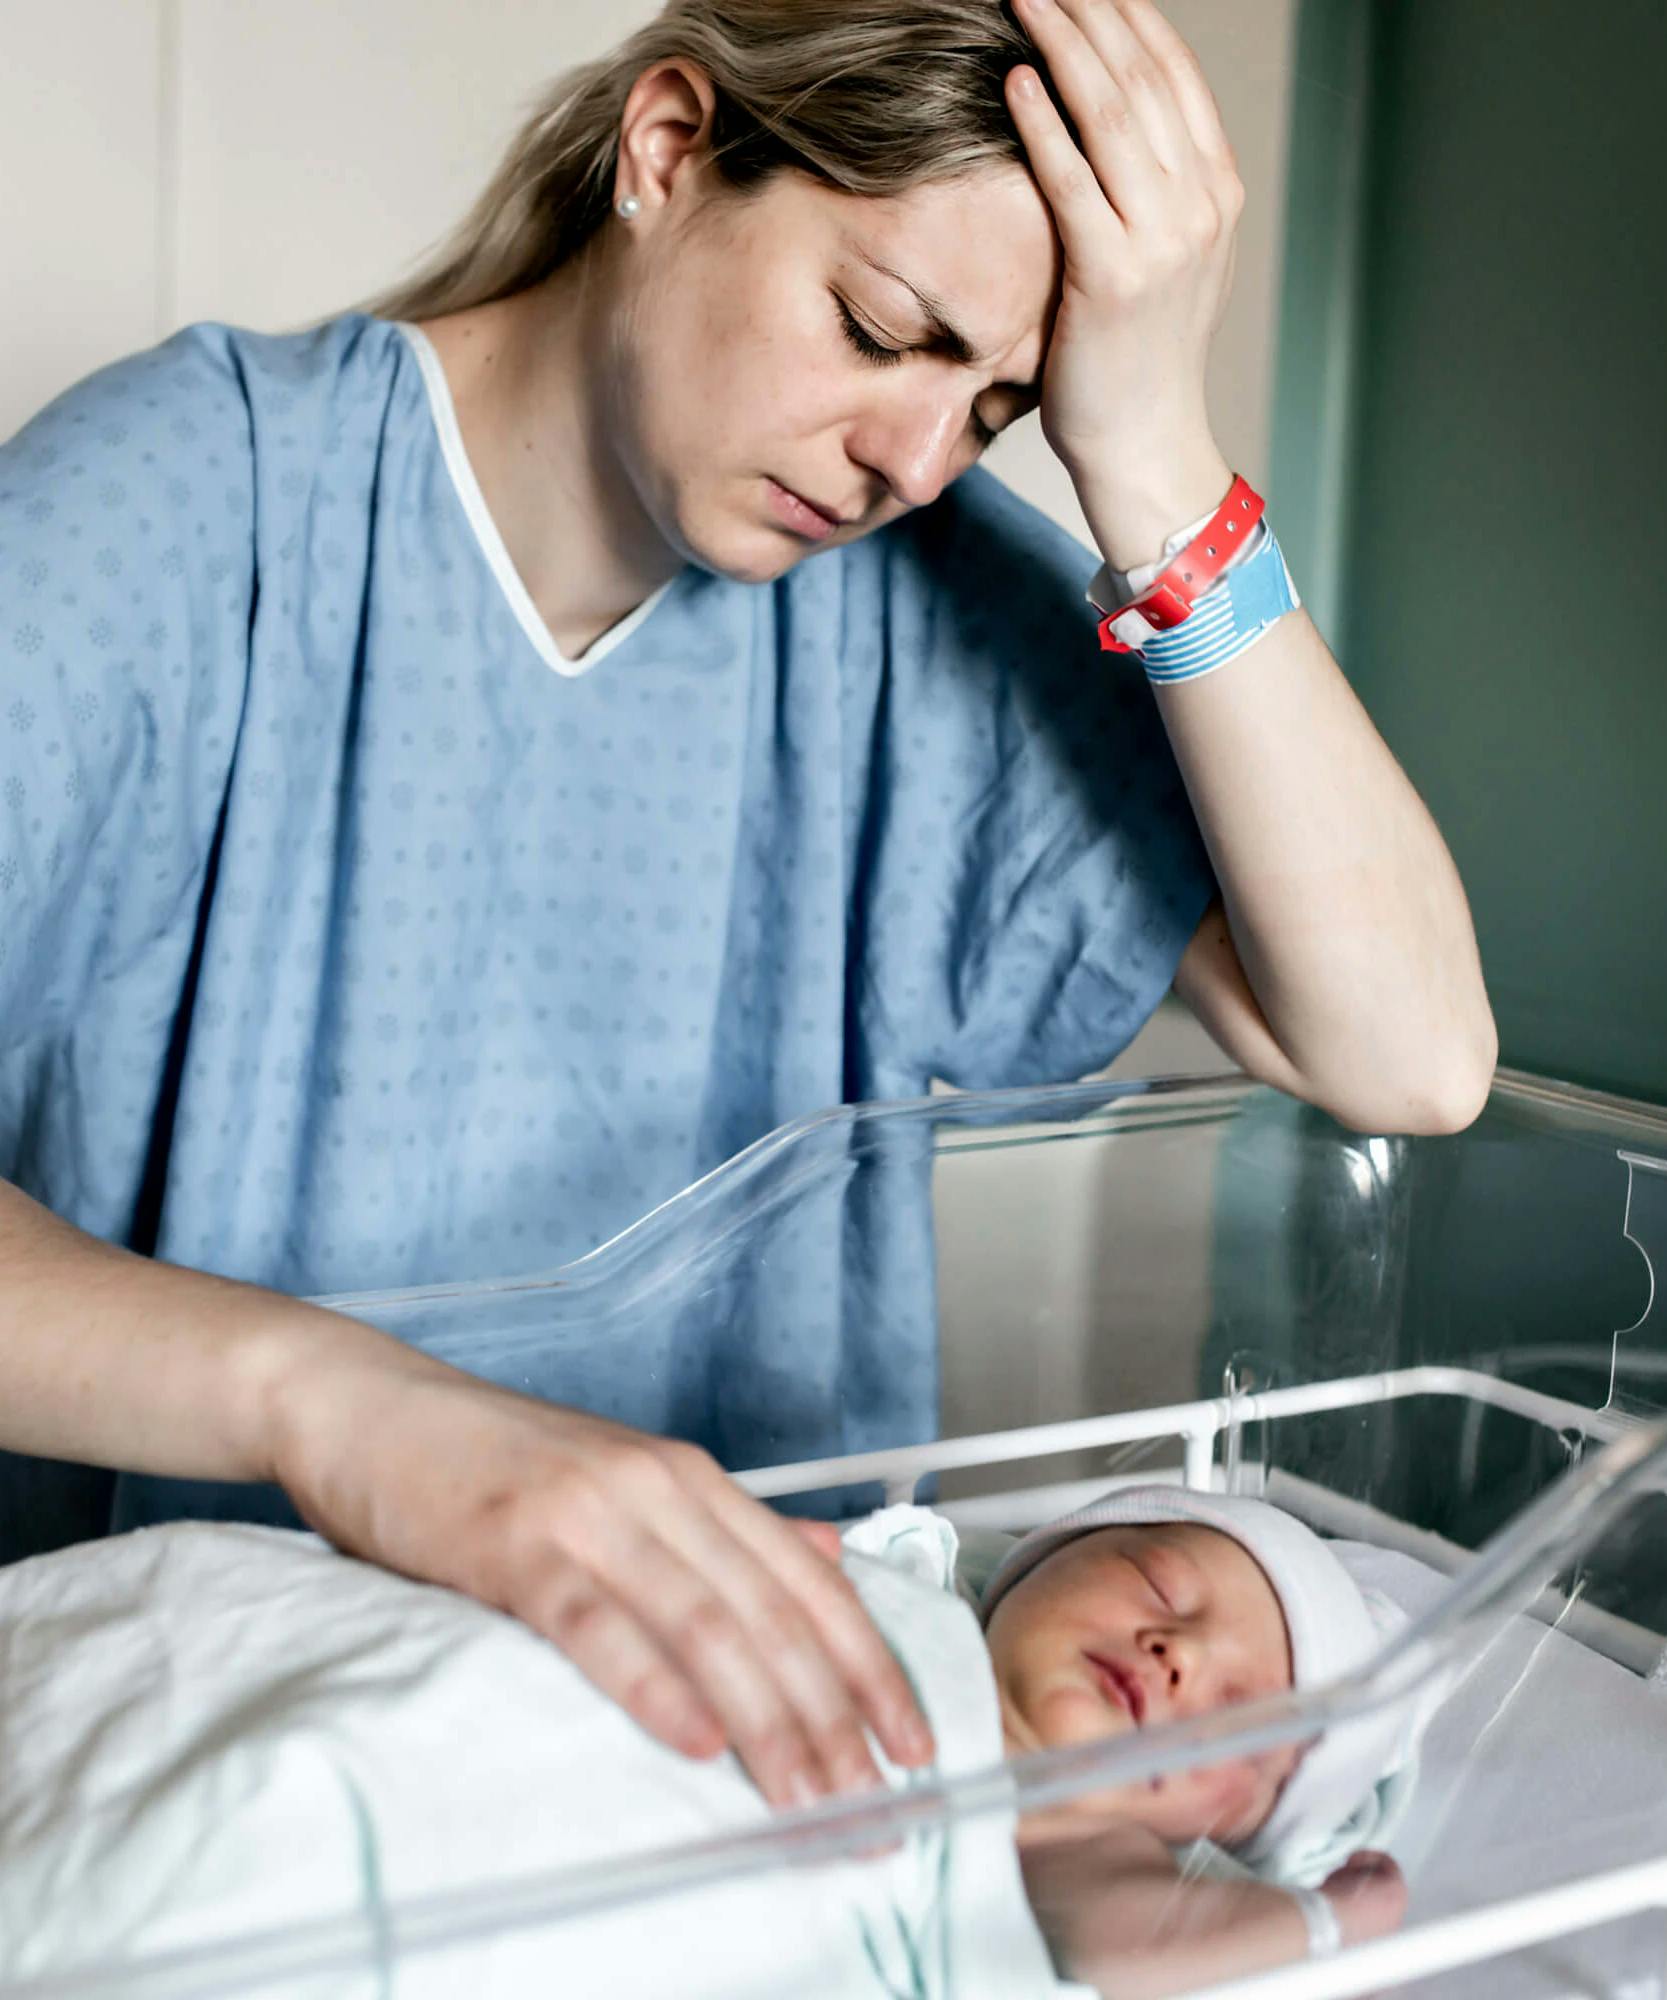 Crisis Nurseries Need More Support To Help Women And Children Avoid Tragedy shutterstock